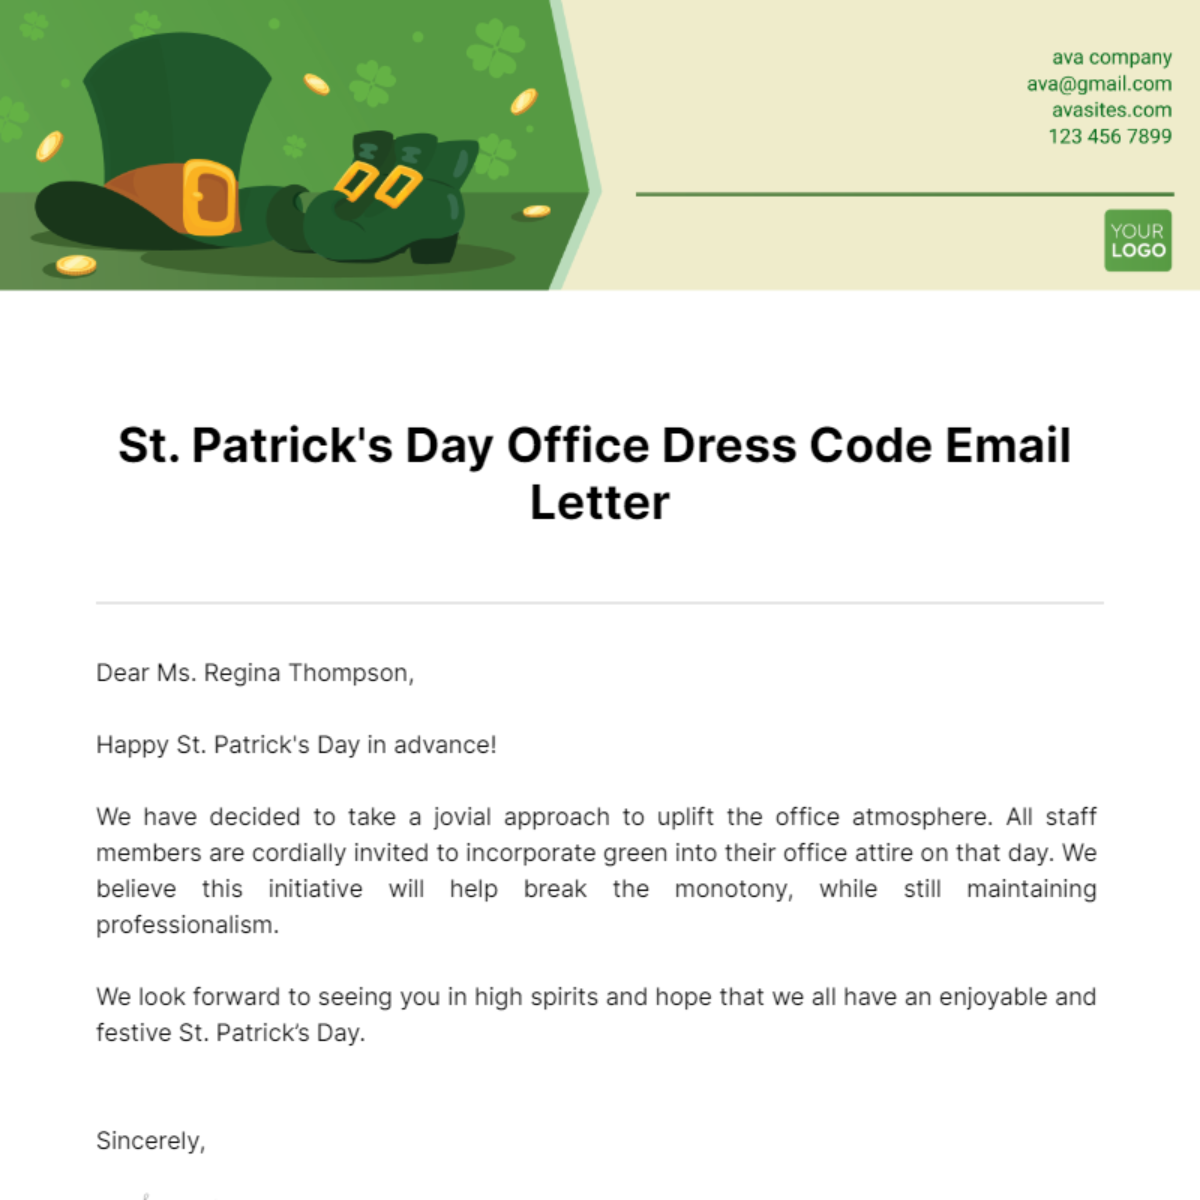 Free St. Patrick's Day Office Dress Code Email Letter Template